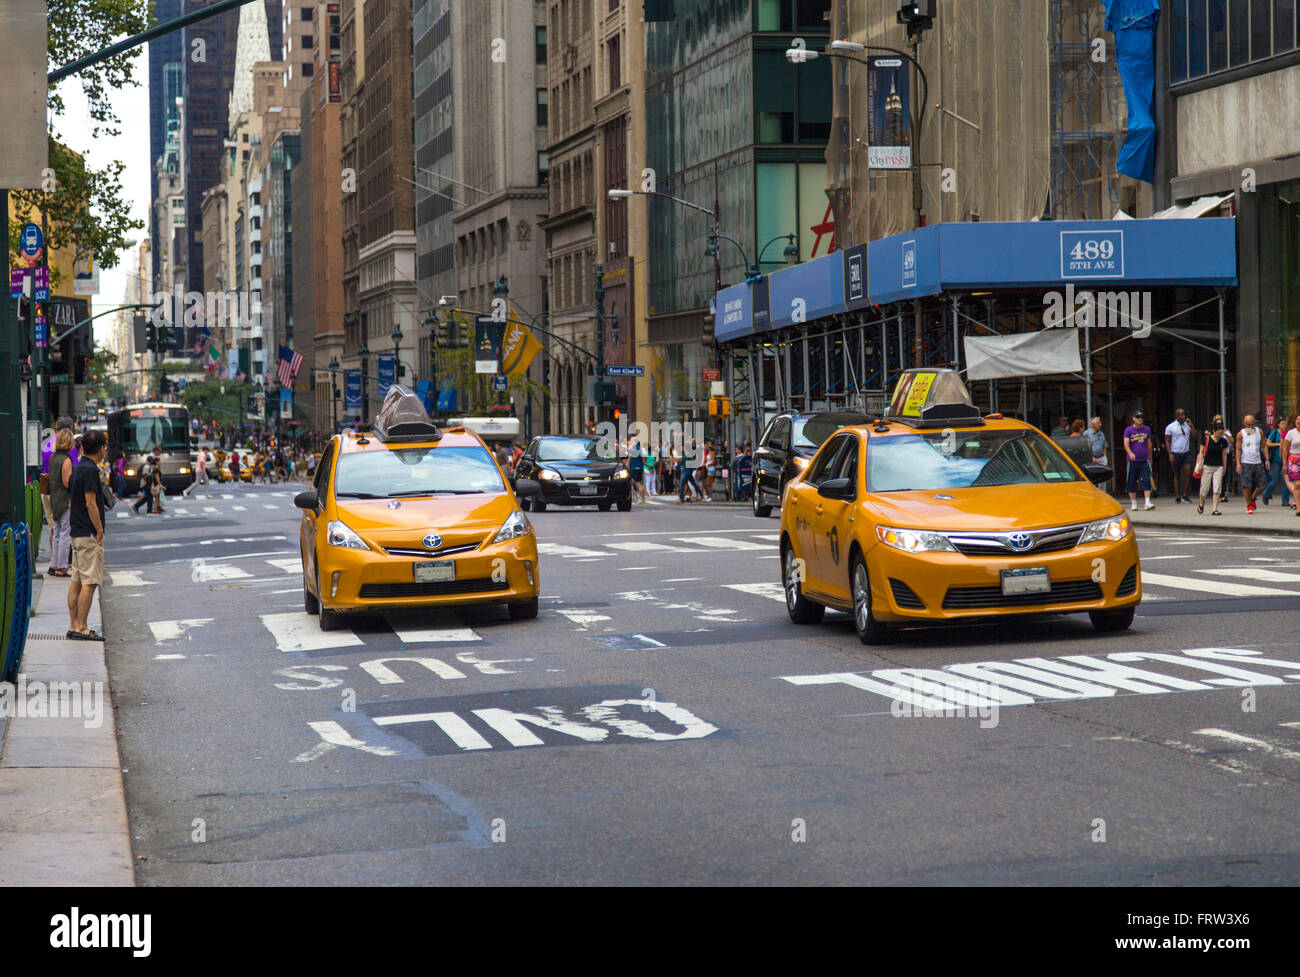 Traffic in New York City with famous yellow-coloured taxi cabs passing by Stock Photo